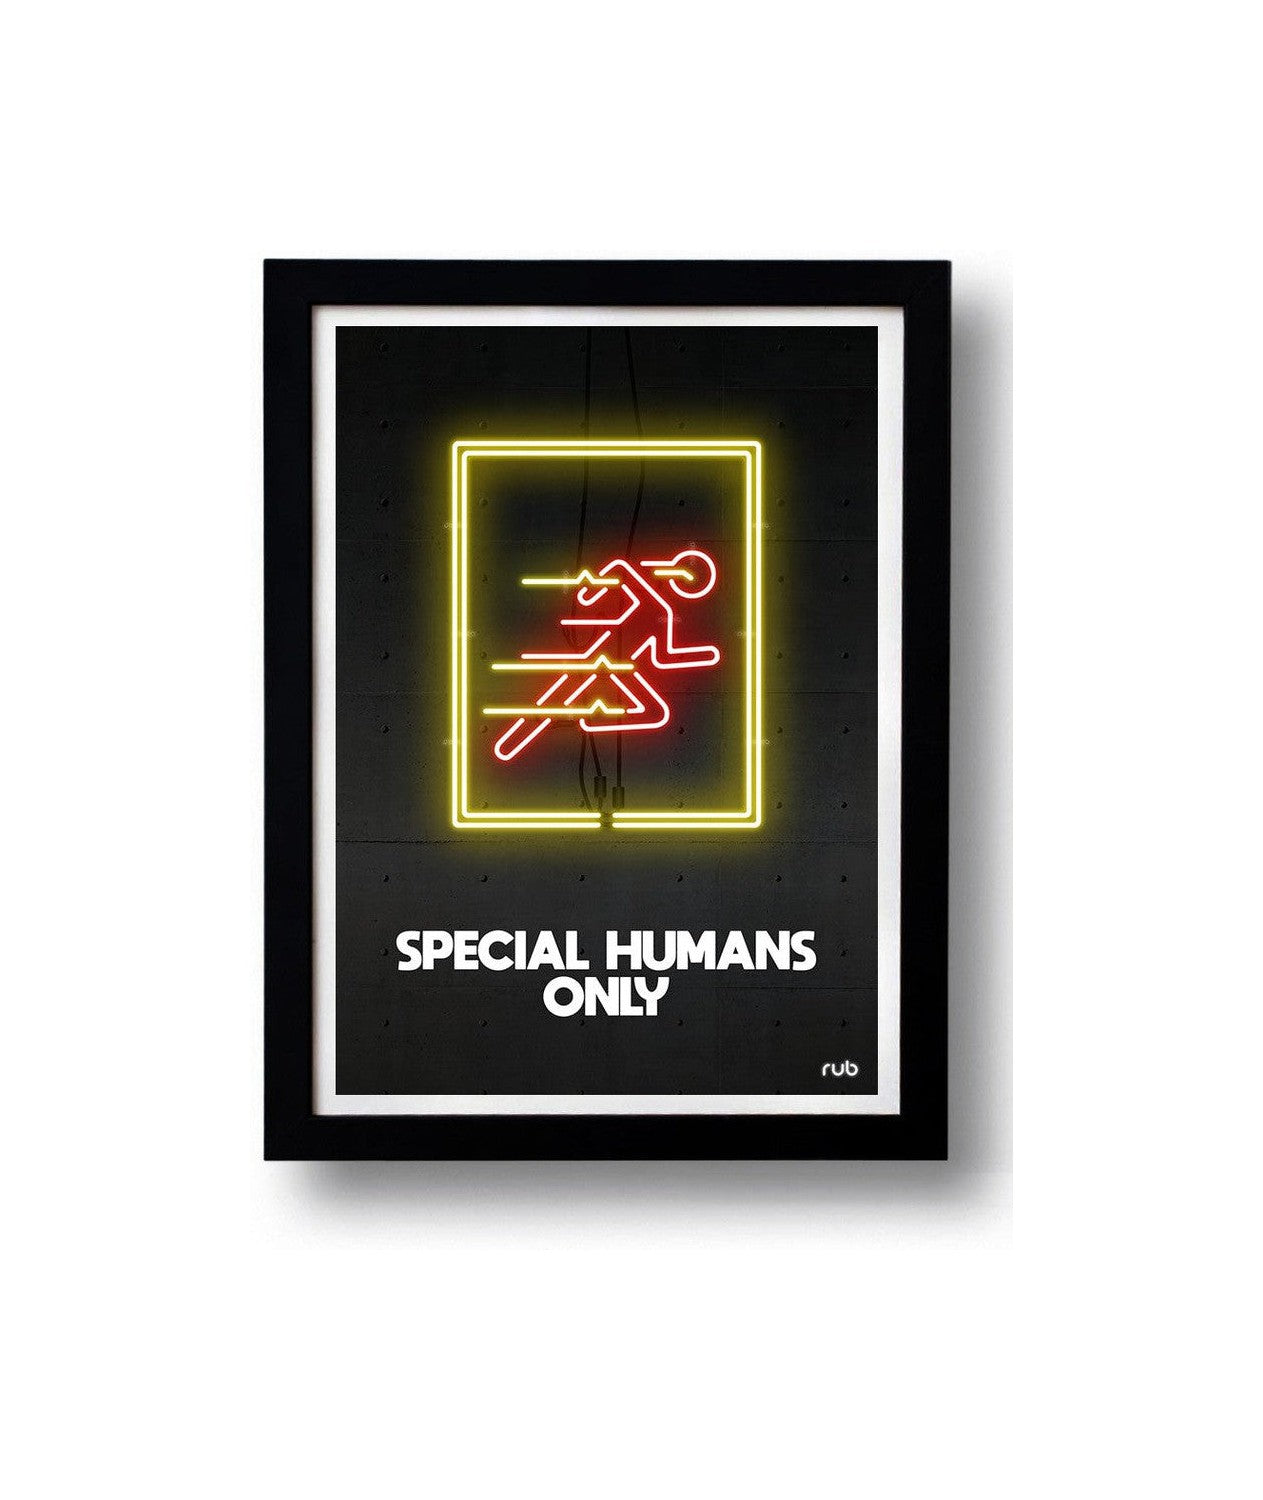 Affiche SPECIAL HUMANS ONLY   by RUB